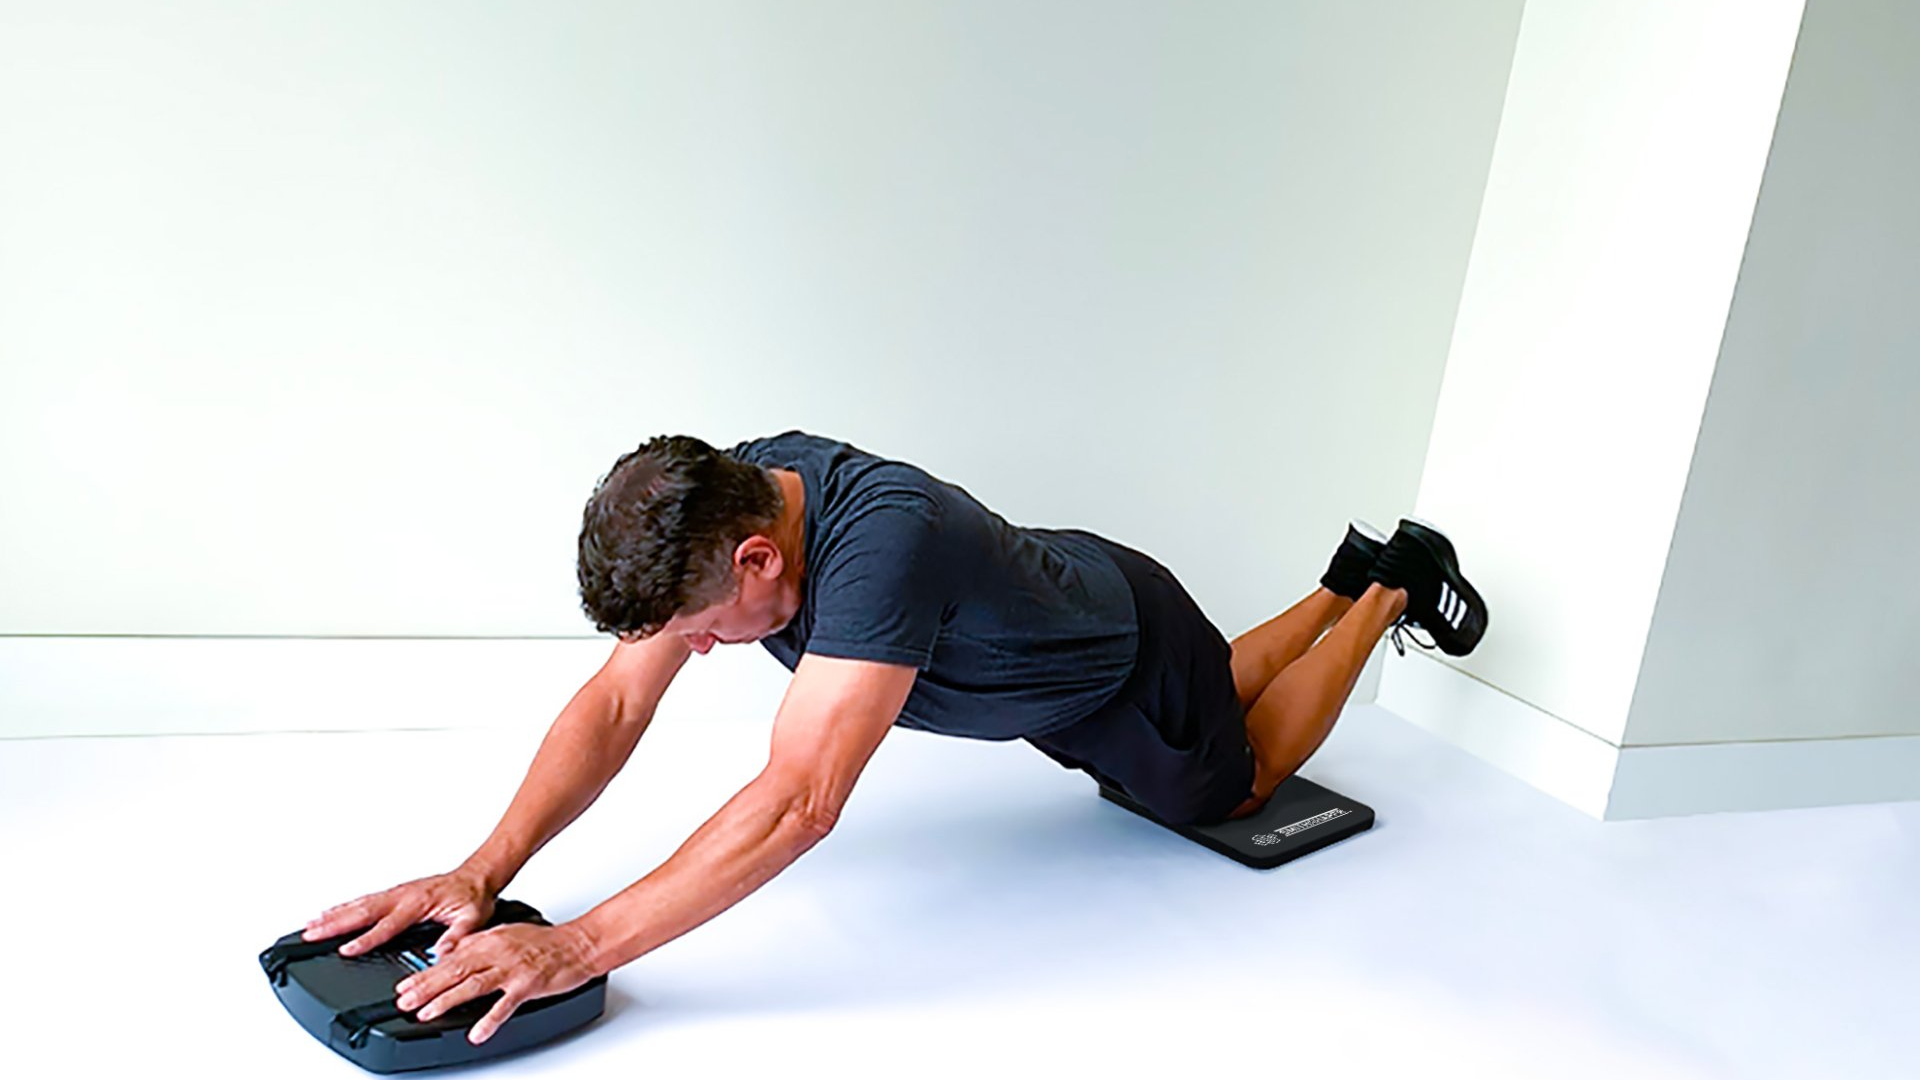 Shows a man performing the ab-roll exercise to strength core and abdominal muscles using the SmithShaper® PRO ASR for Abs, Core, Legs, Butt, Waist, Chest, Arms and Shoulders.